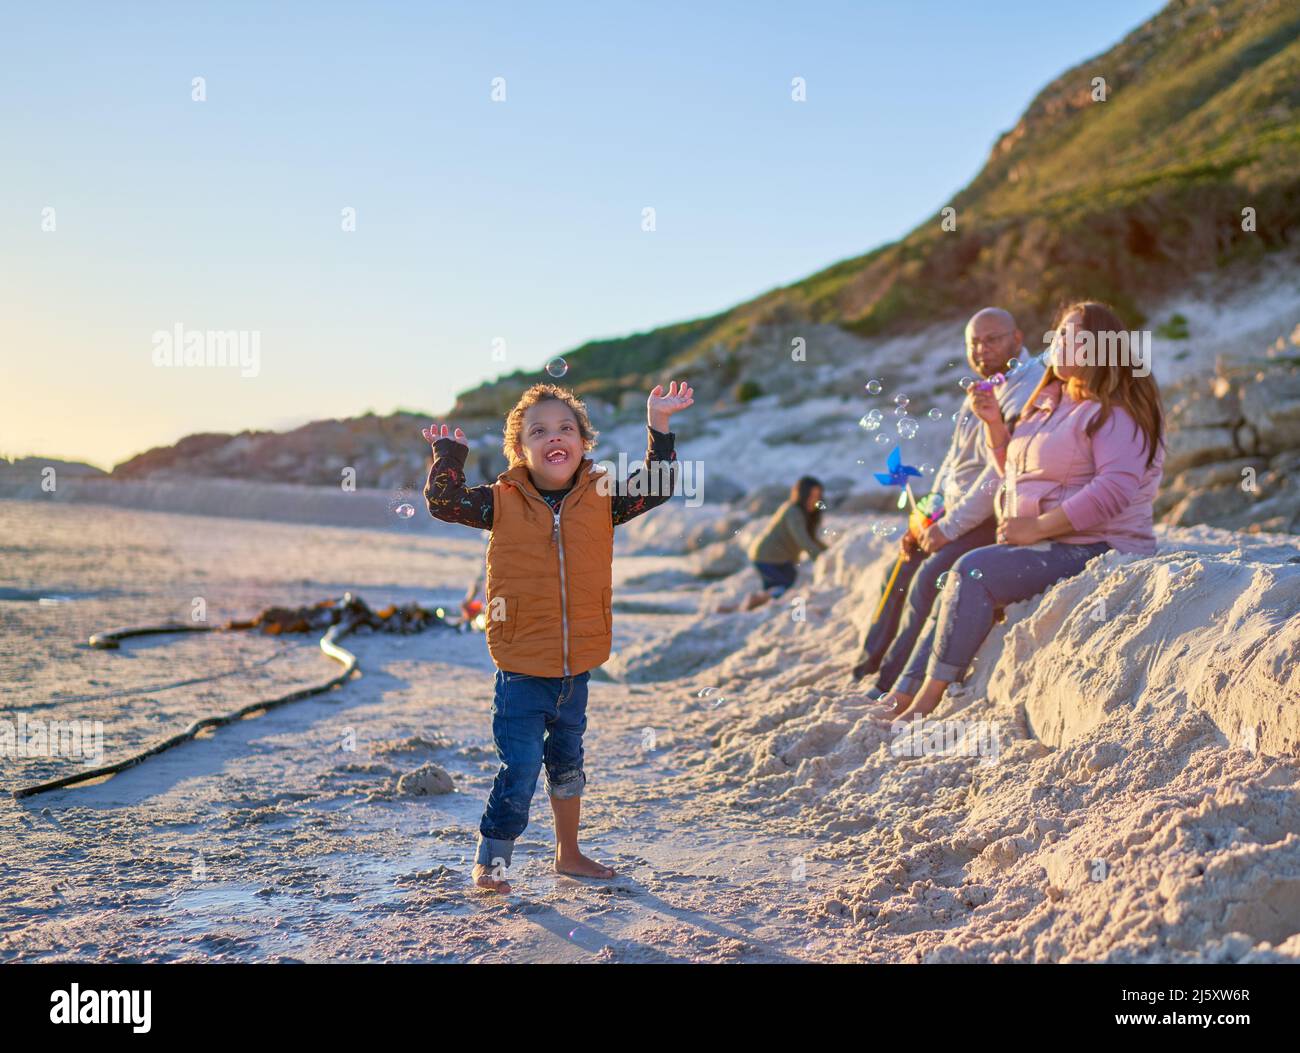 Happy boy with Down Syndrome playing with bubbles on sandy beach Stock Photo